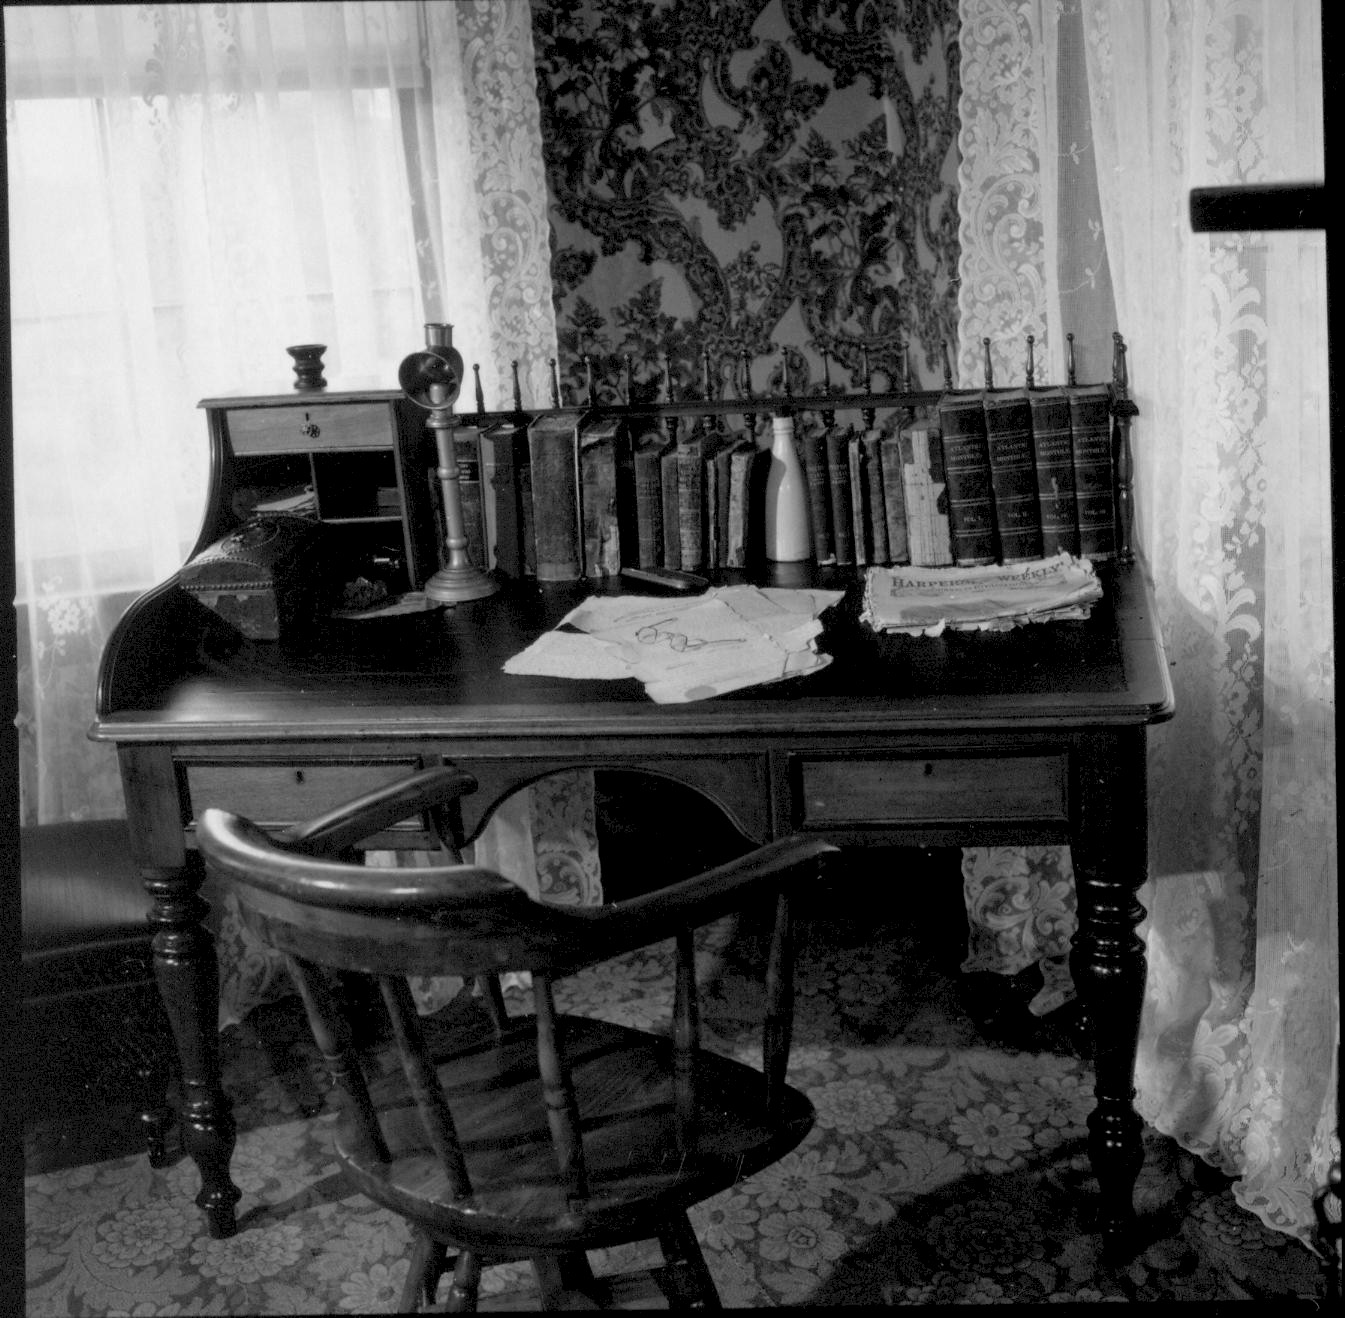 Mrs. Lincoln's Bedroom Lincoln Home, Mrs. Lincoln bedroom, table, books, papers, glasses